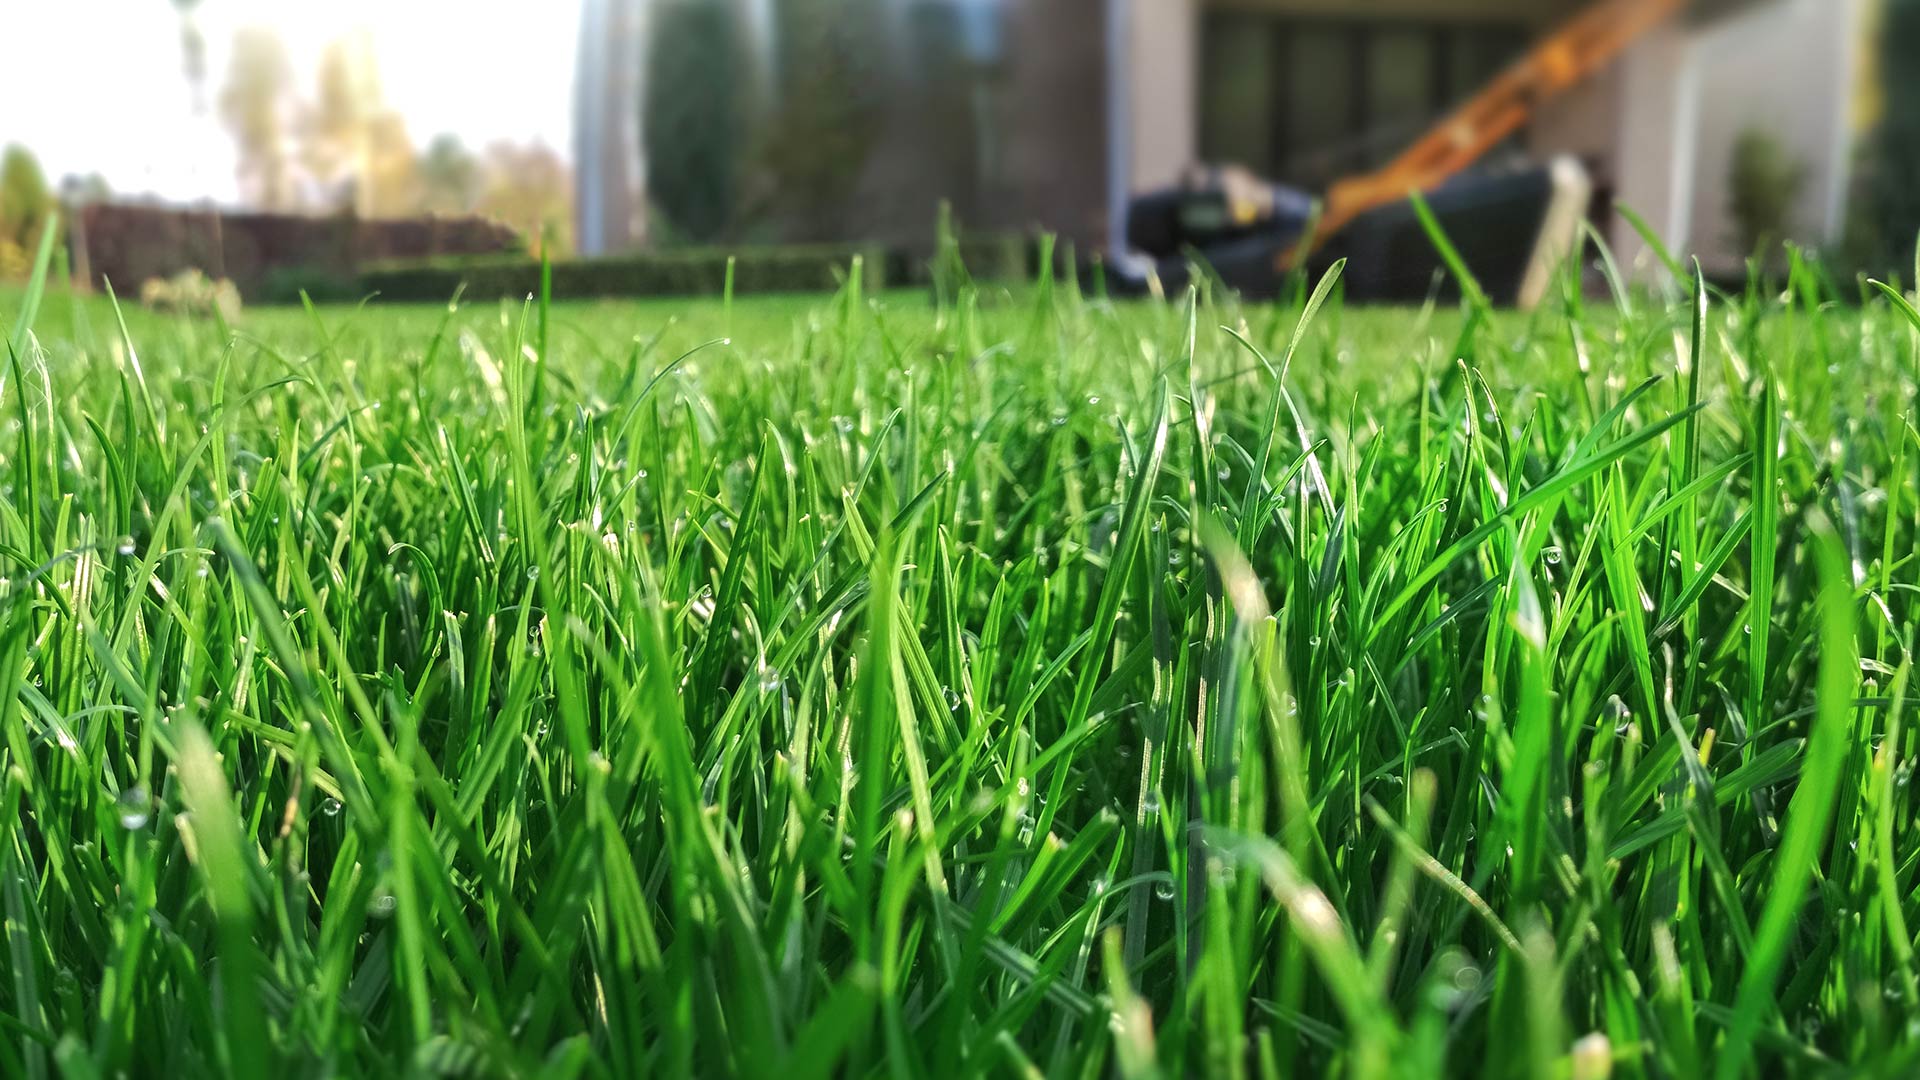 Vibrant lawn with healthy grass blades in Argyle, TX.